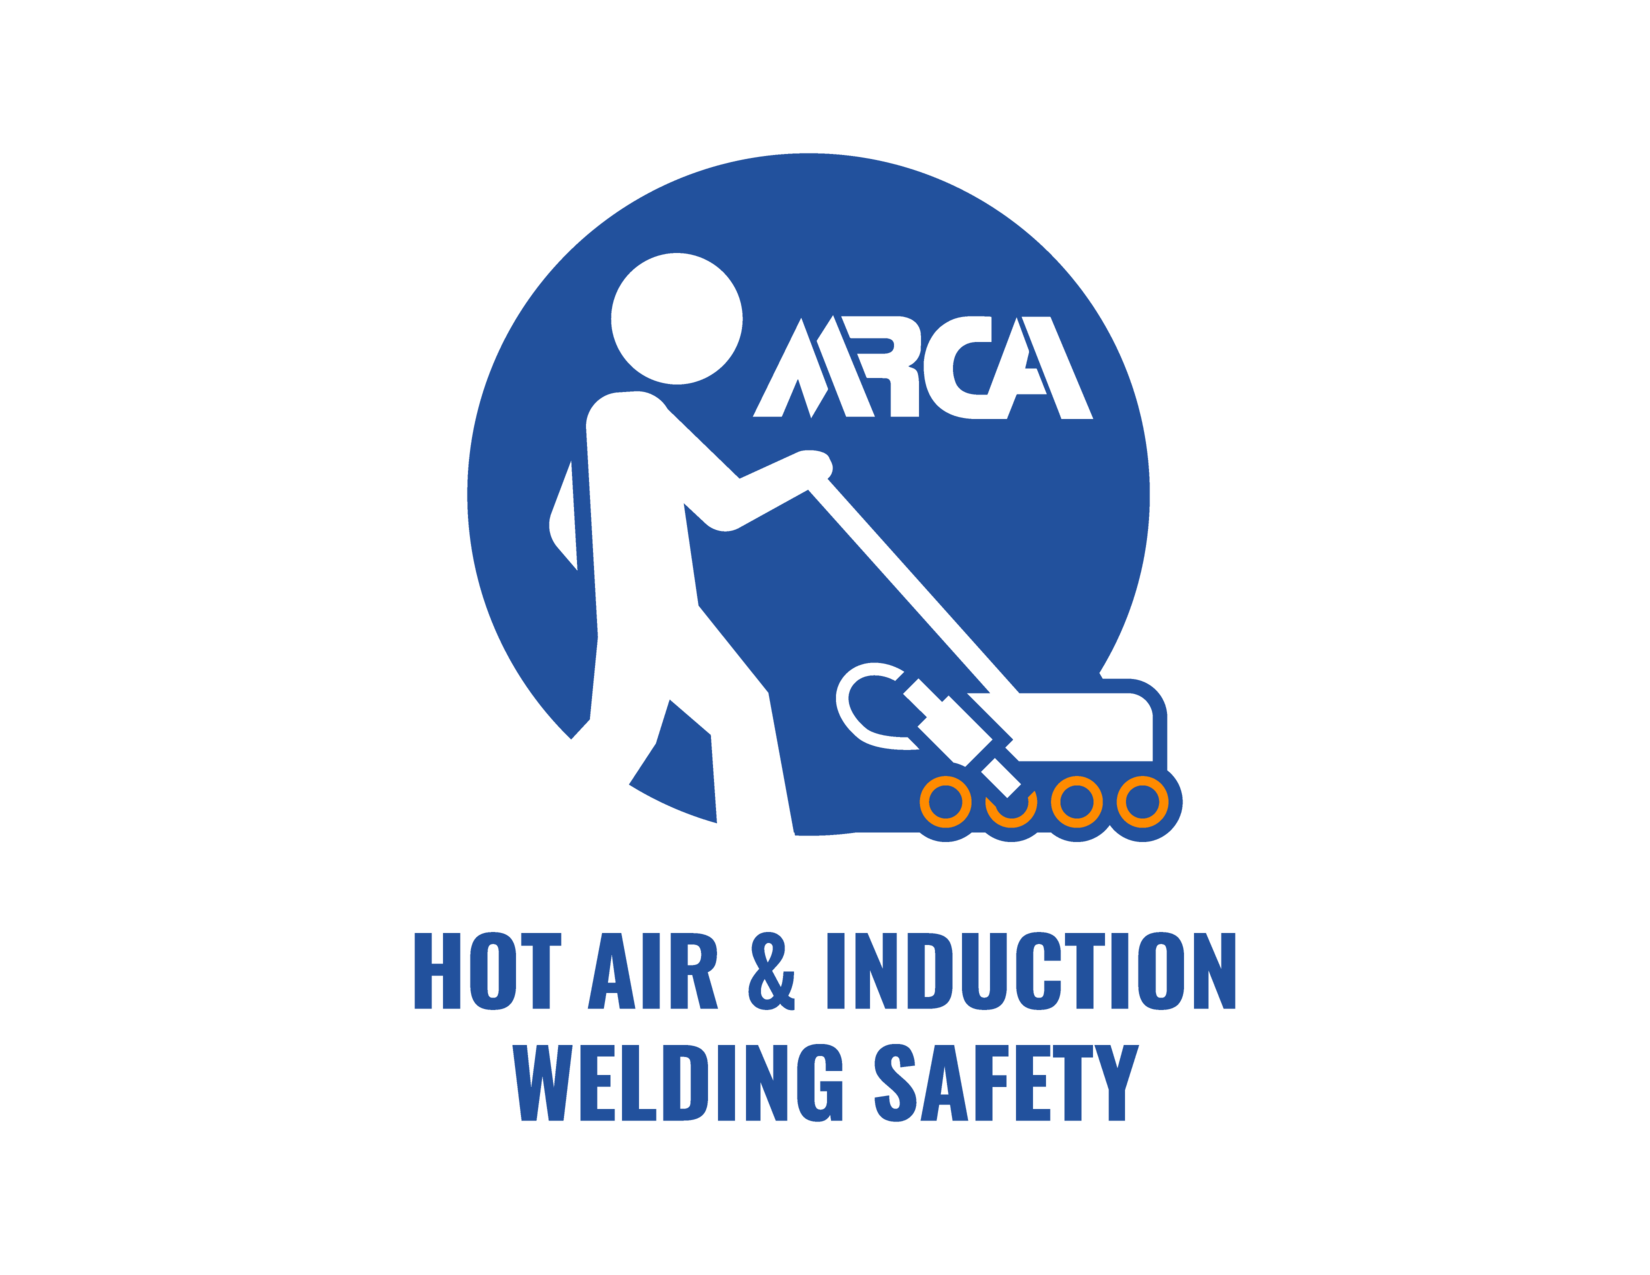 MRCA Hot Air and Induction Welding instructor certification course